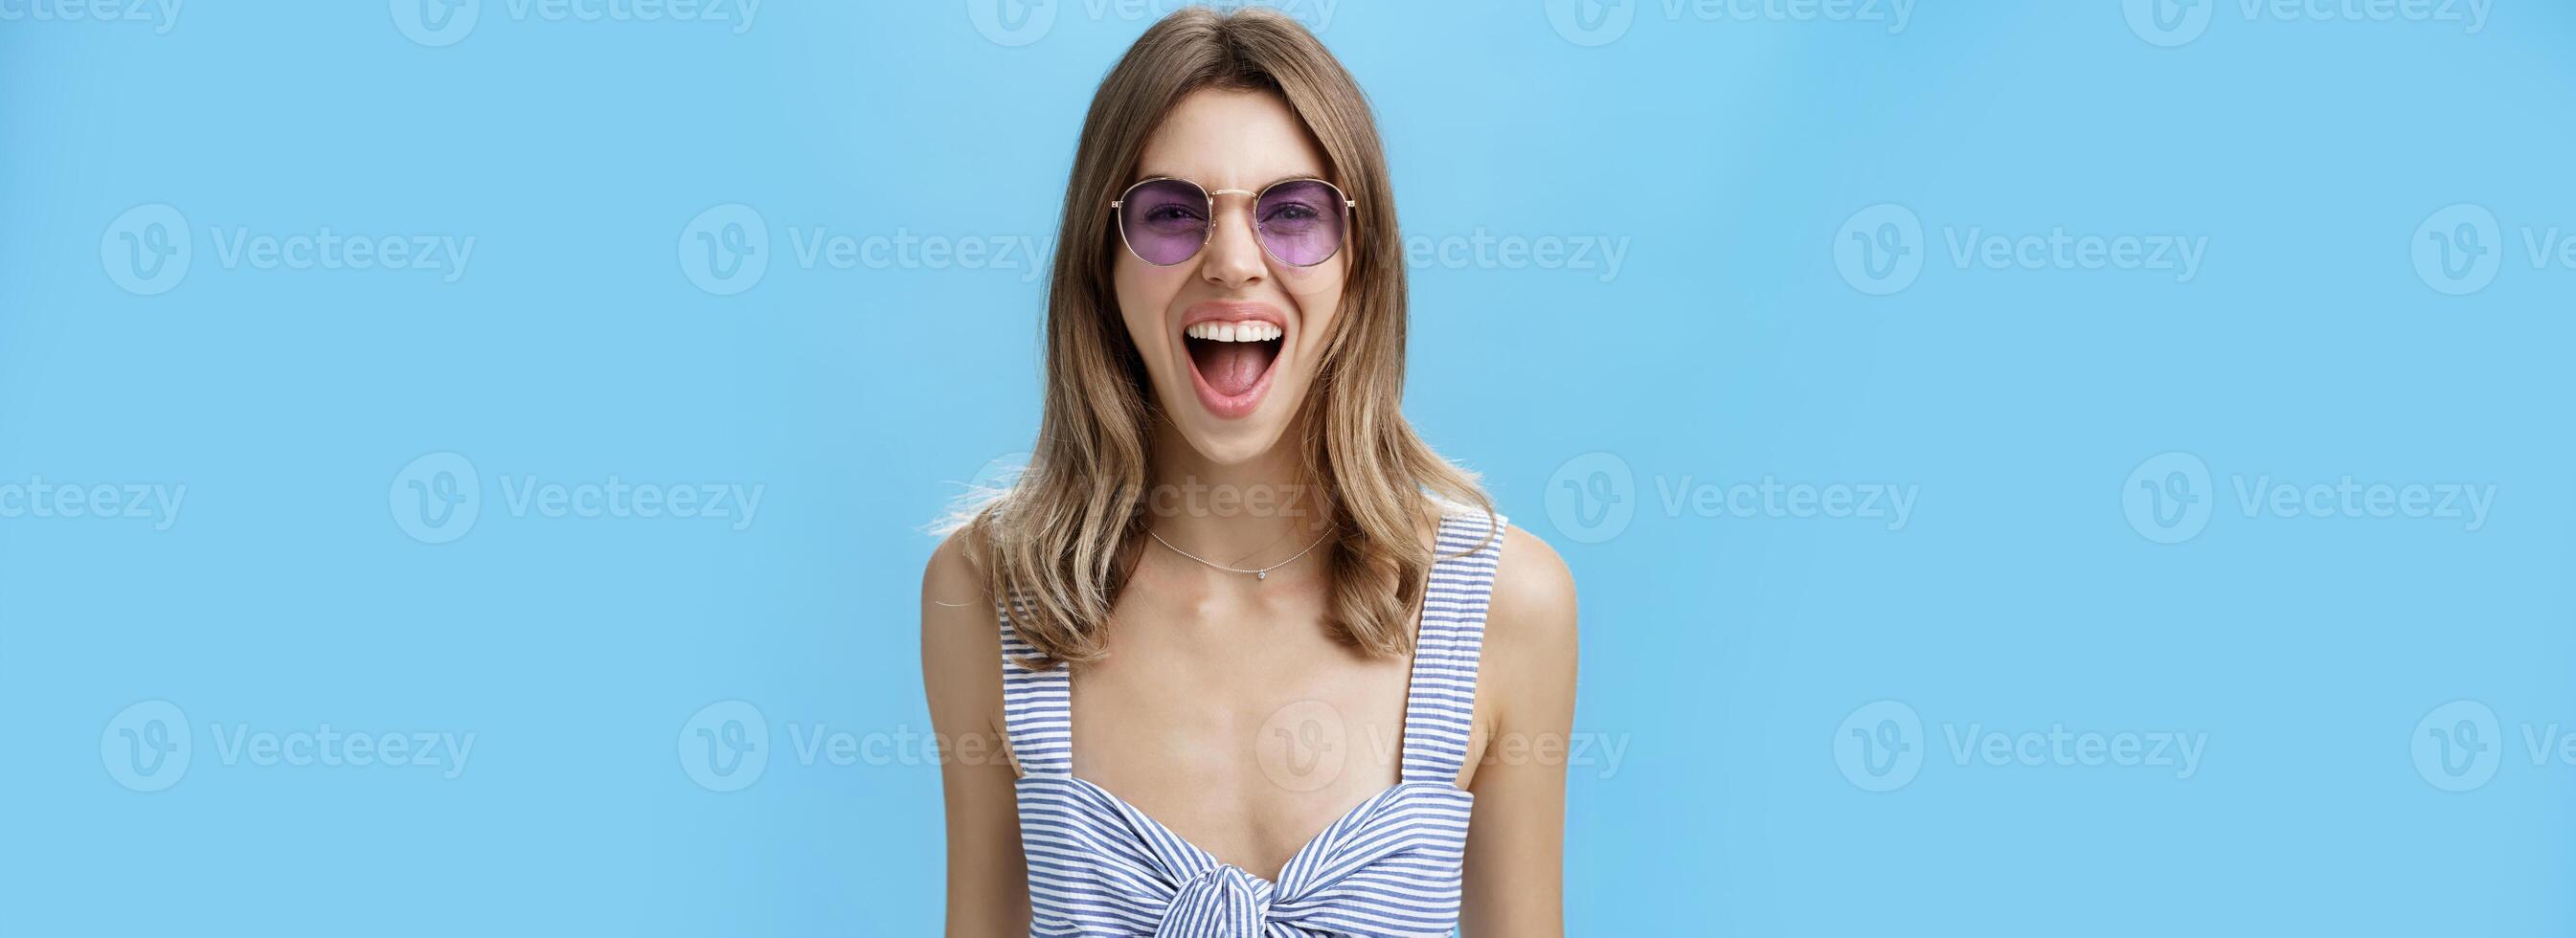 Expressive and careree woman being wild ad free yelling out loud at camera wearing awesome stylish sunglasses and striped top letting out emotions being open-minded and rebellious over blue wall photo